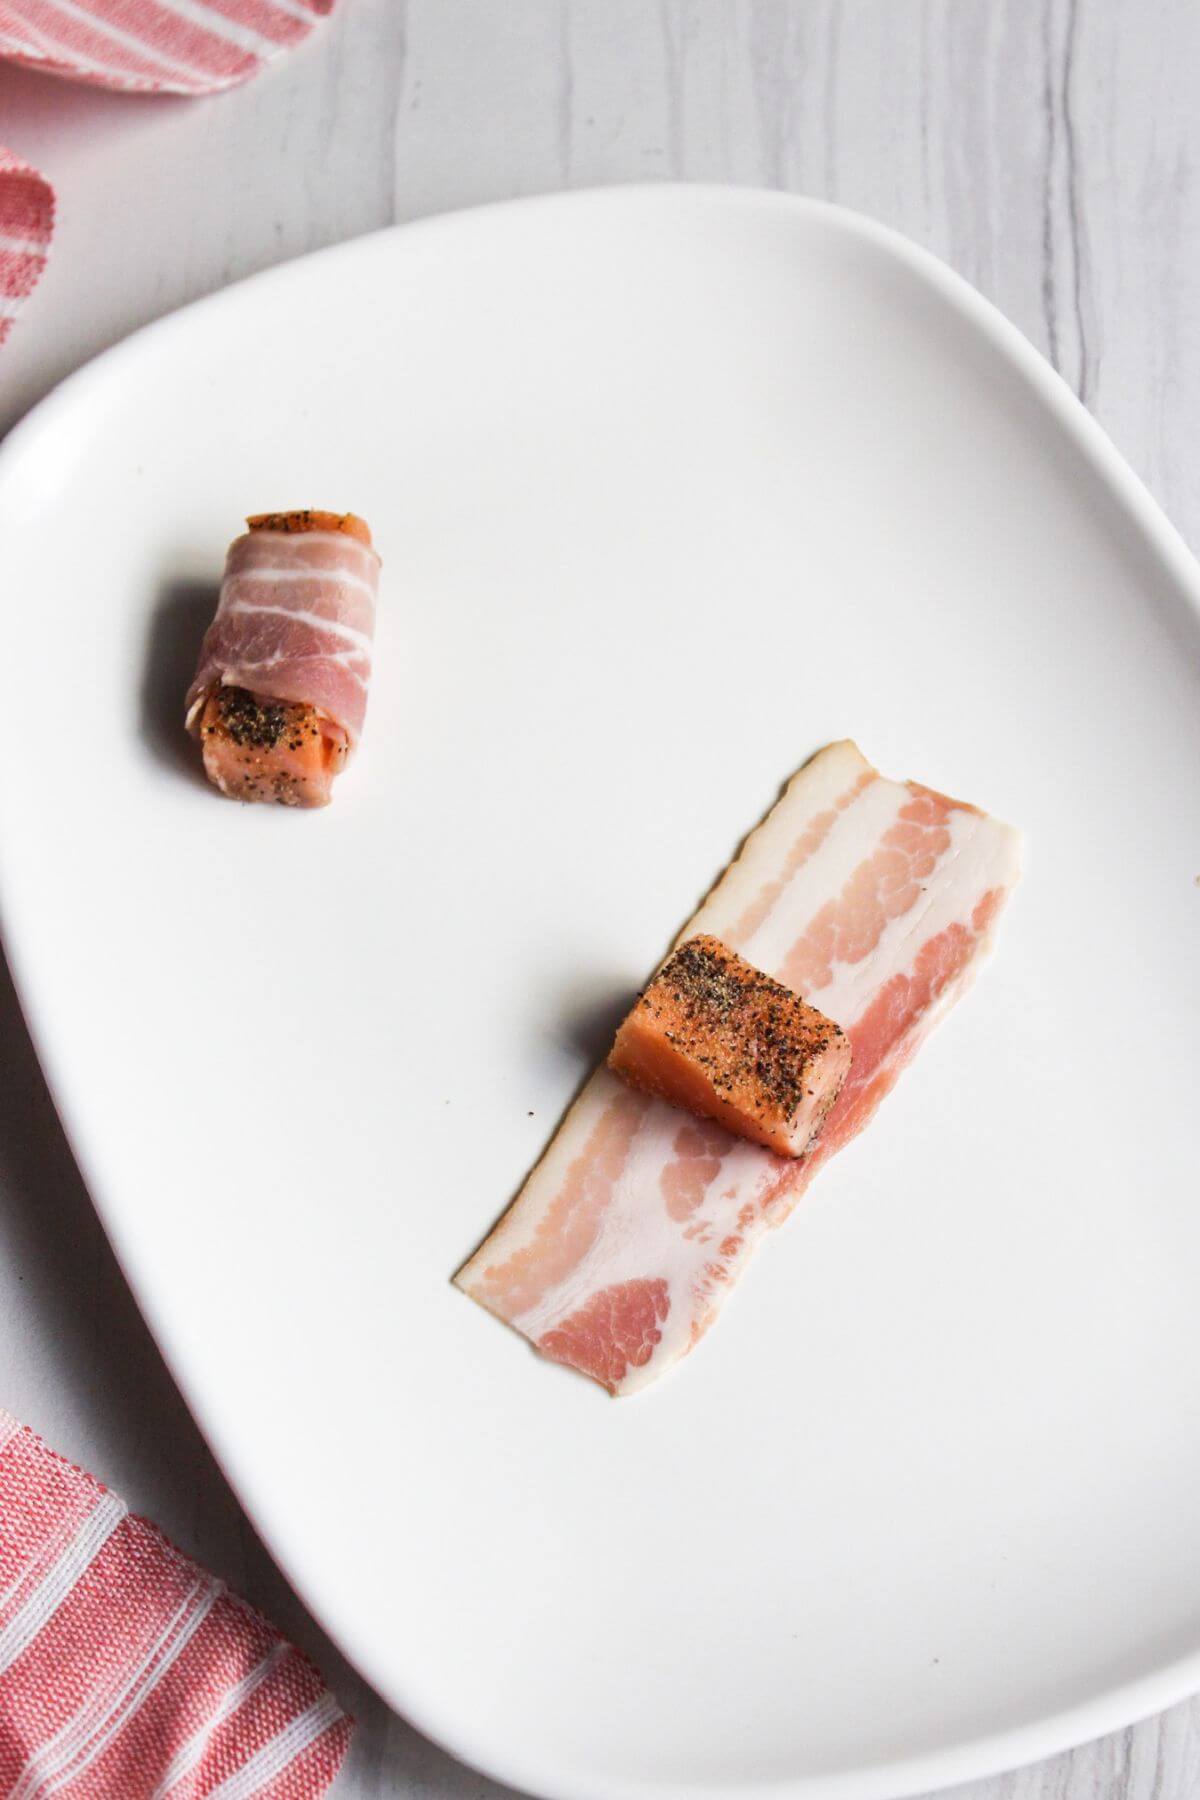 Wrapping salmon cubes in bacon on a white plate.